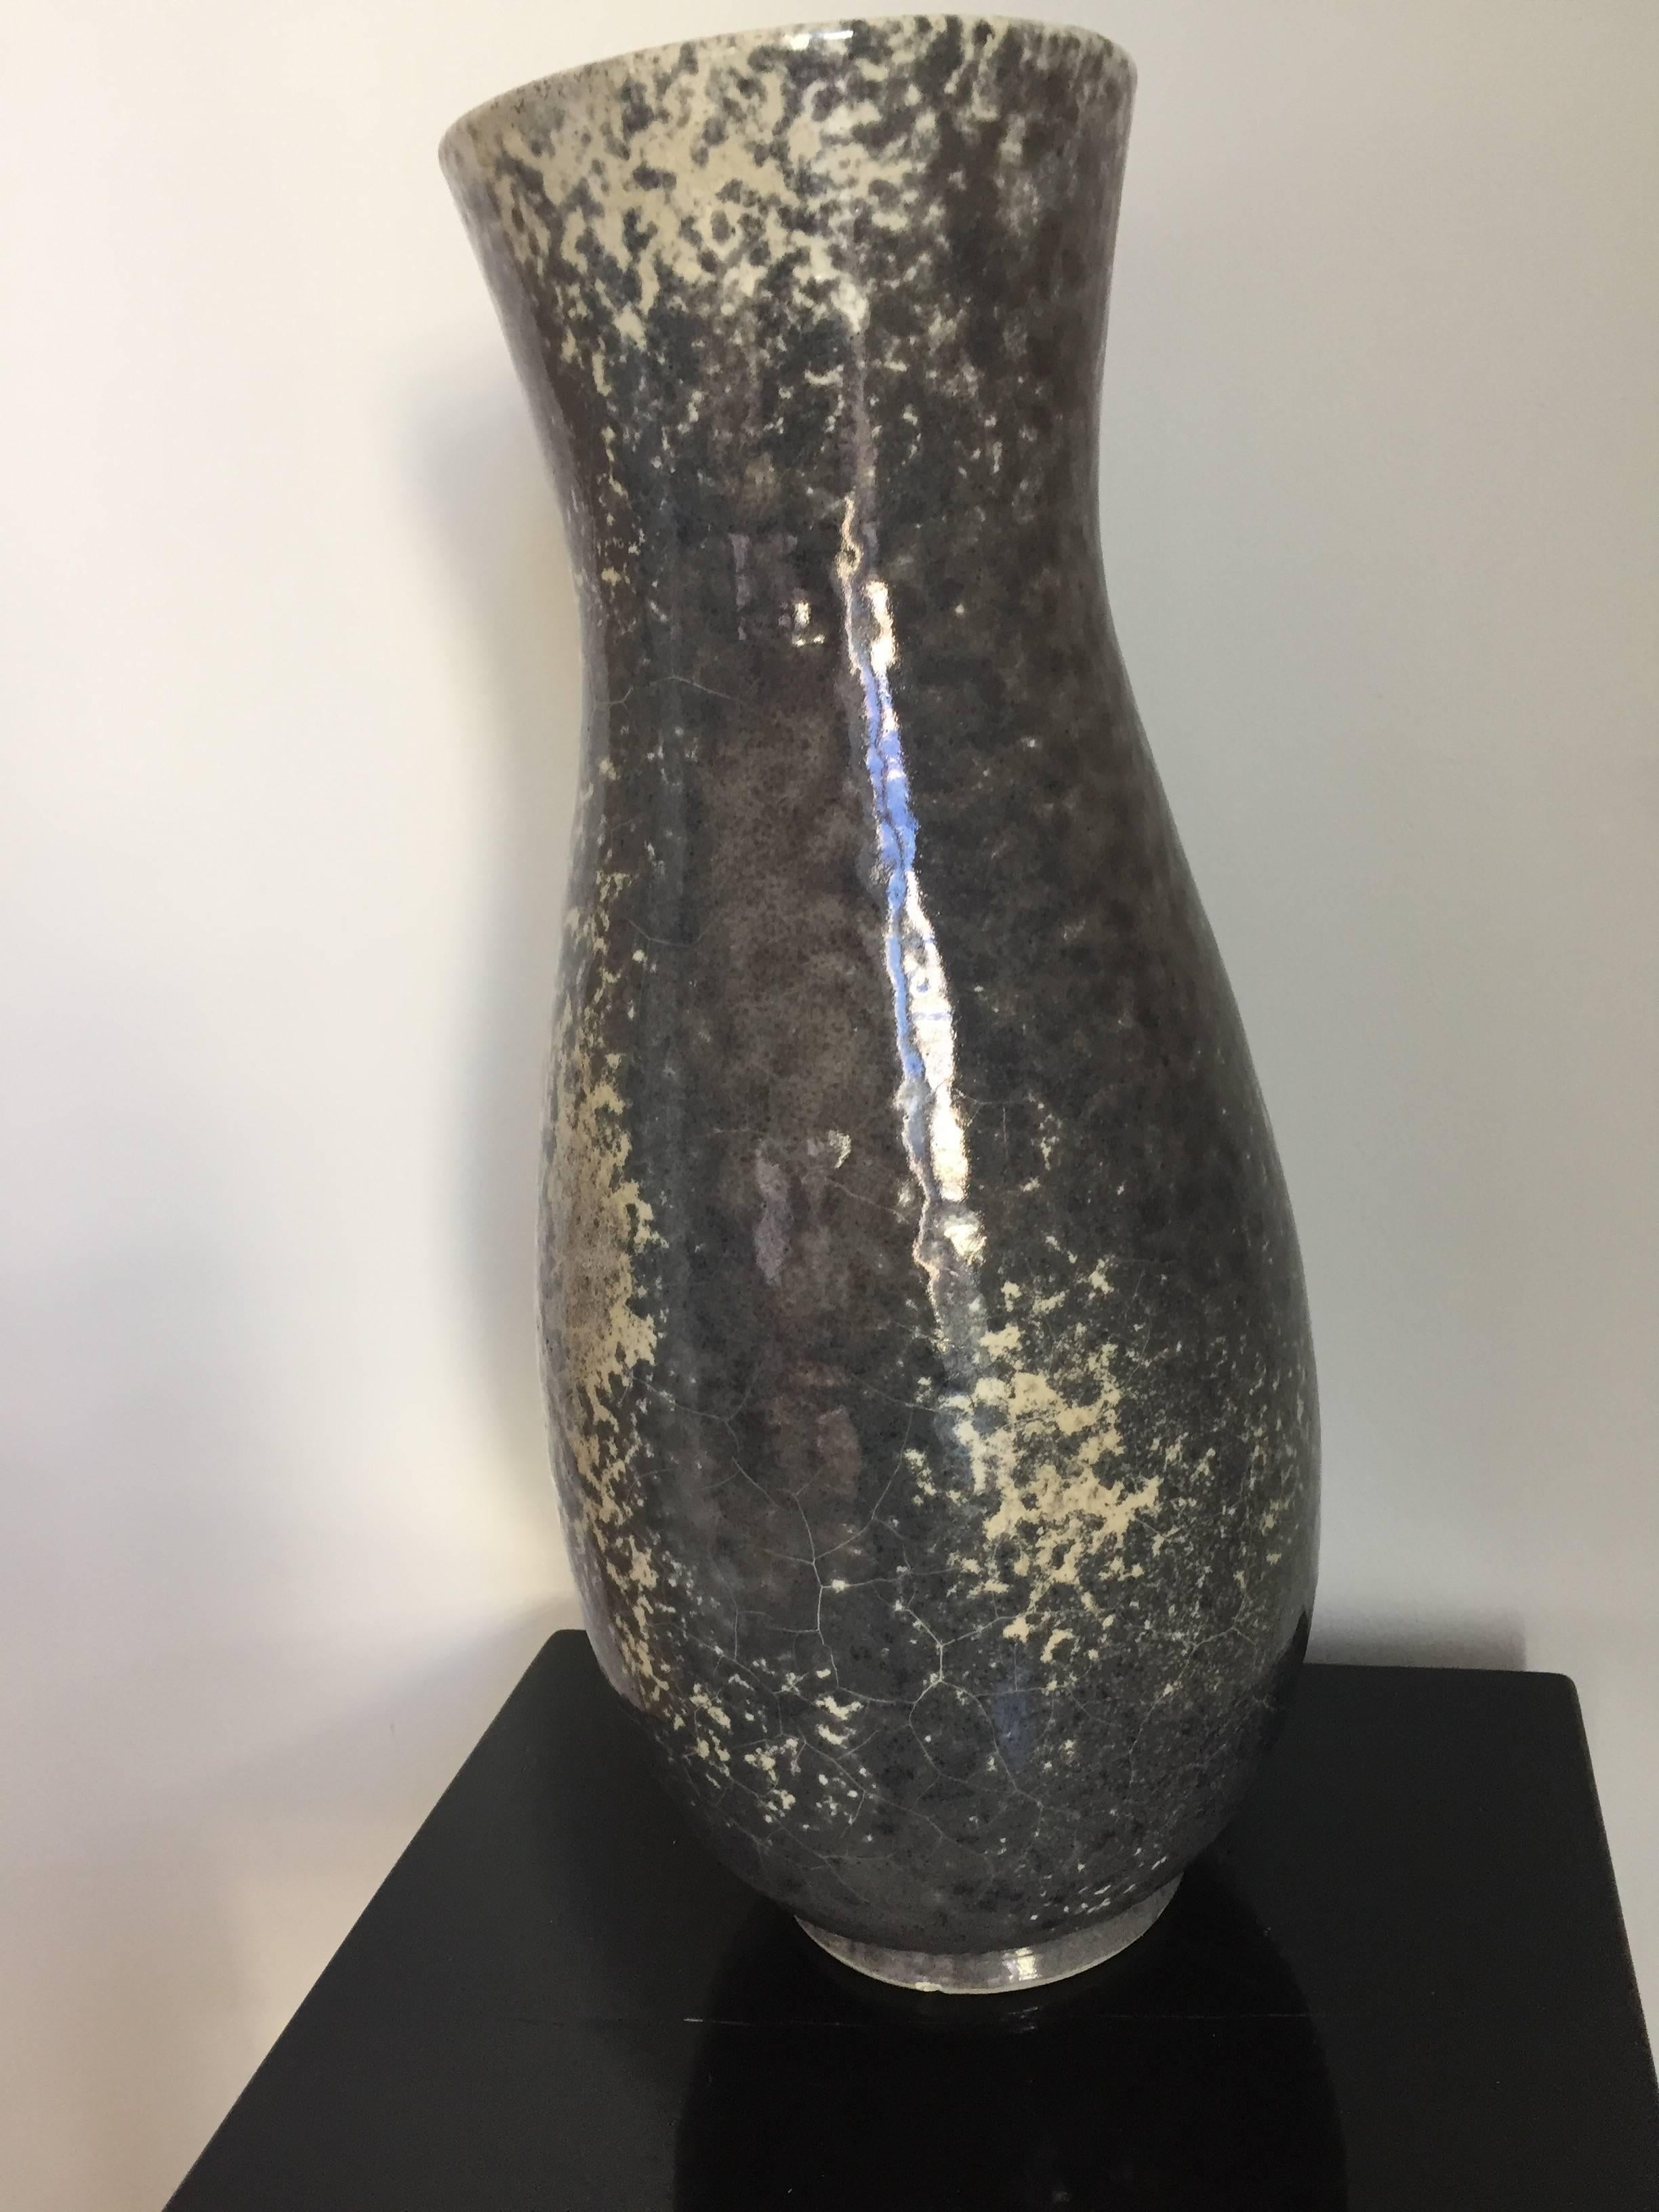 Rare ceramic vase by Richard Uhlemeyer, German Ceramist,

Large floor vase, beautiful glaze in grey and off-white shades

Germany, 1940s, stamped at the bottom edge, minor damage at the 
Bottom edge, size 52cm high x 34cm diameter.
  